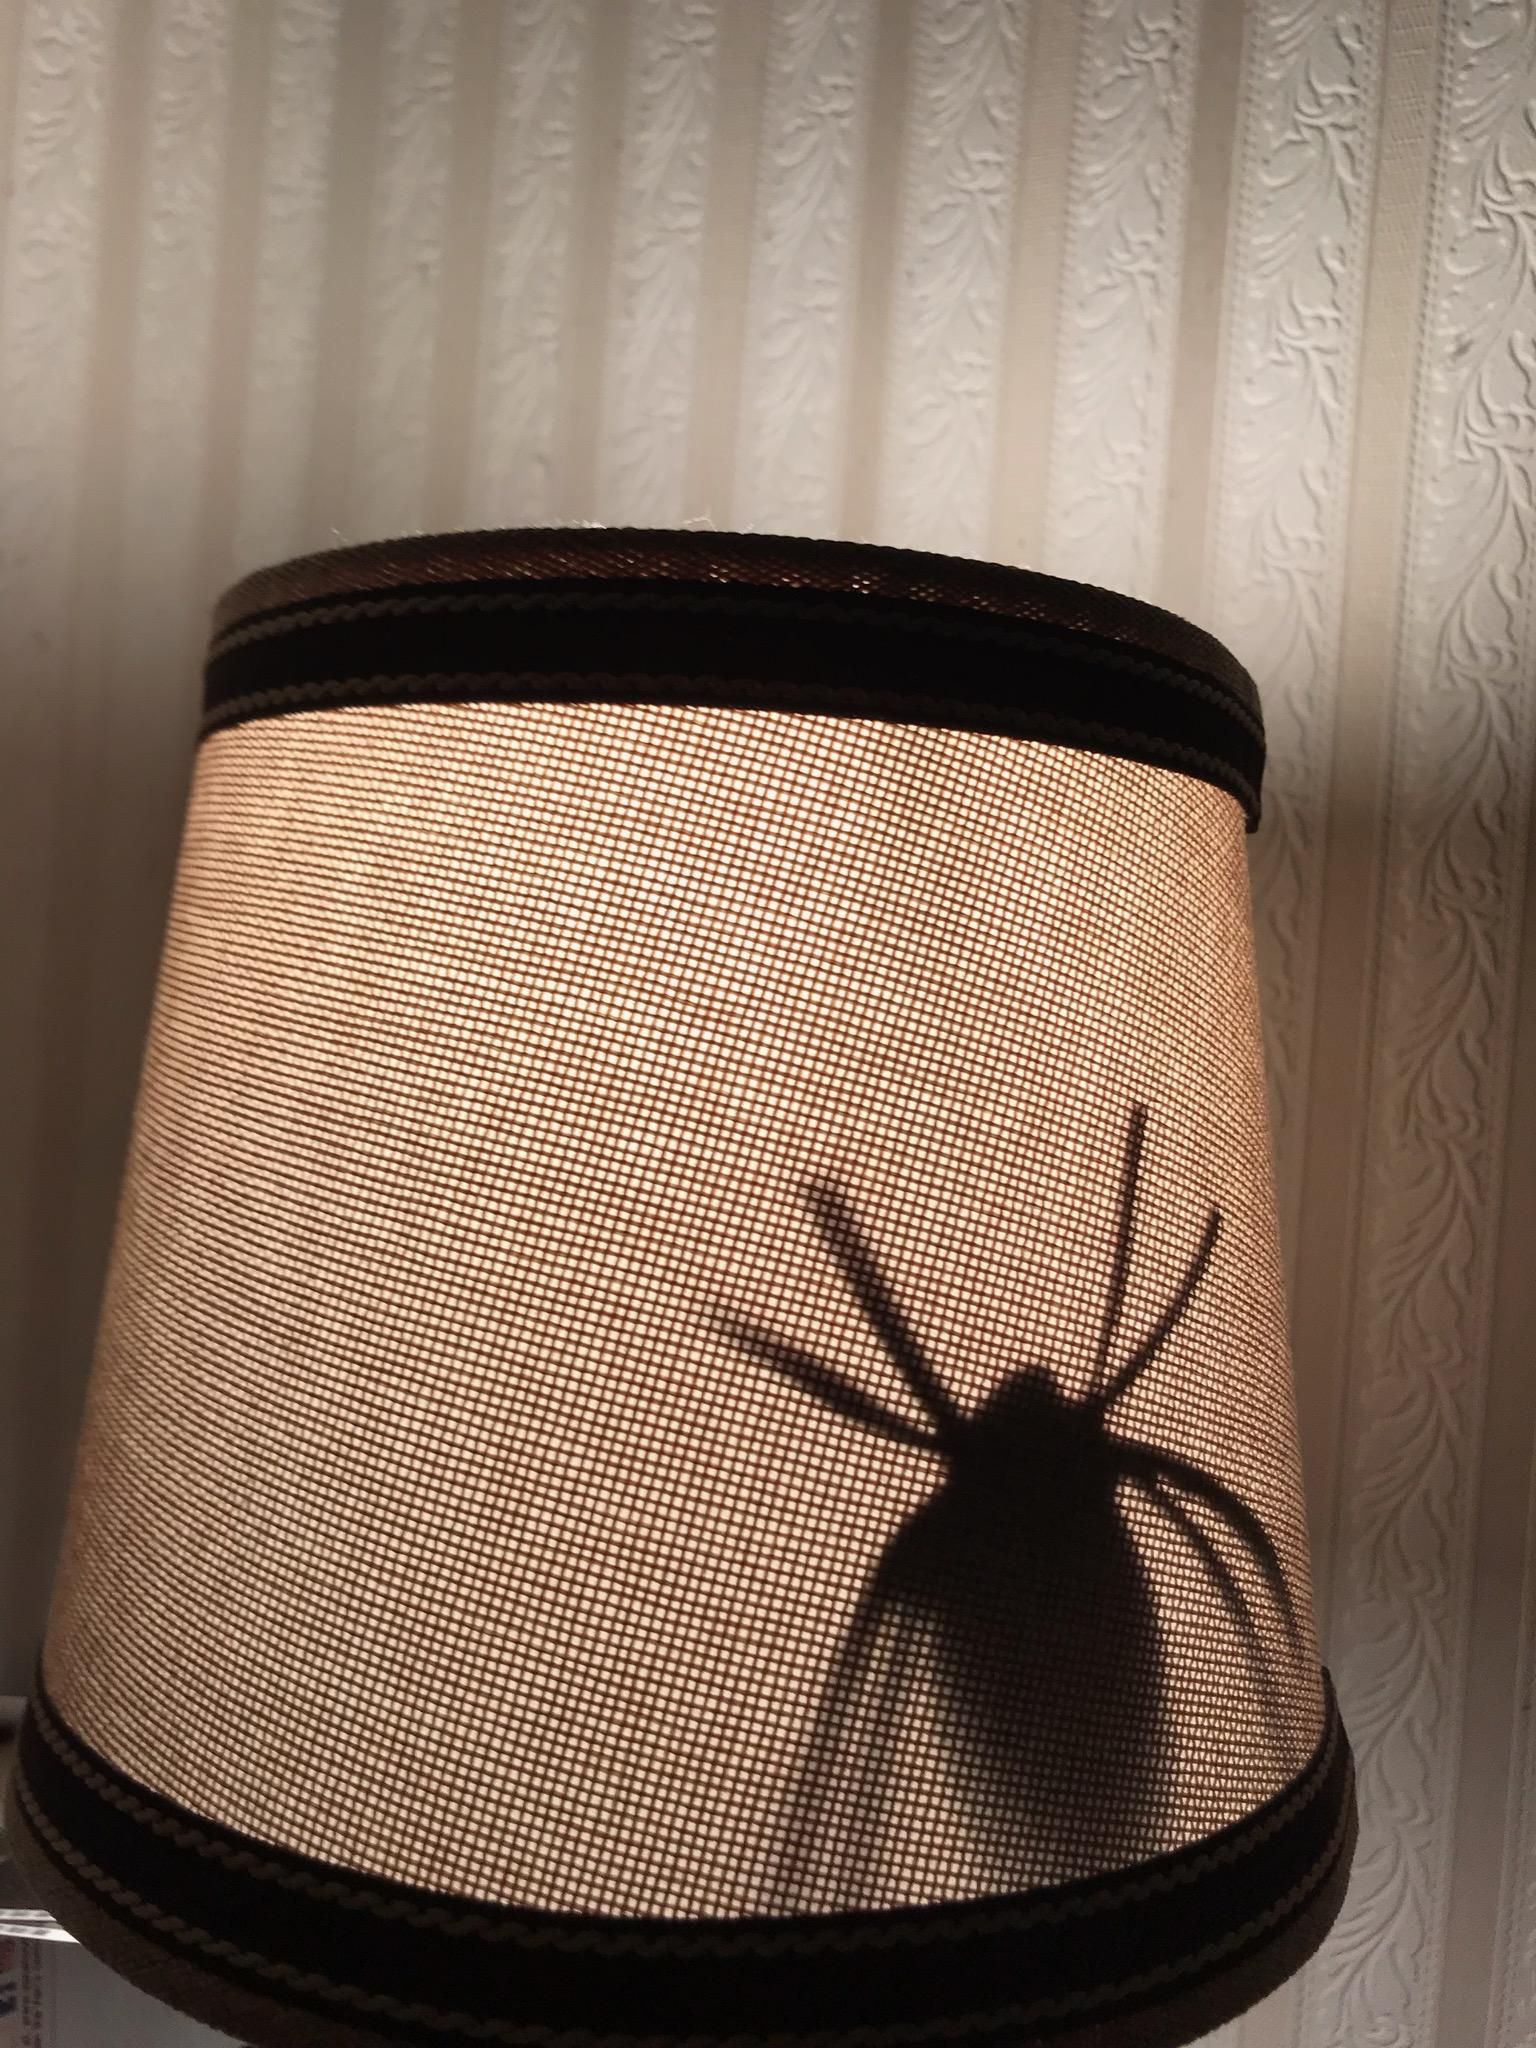 Completely unprompted, my son cut a paper spider out and taped it inside my wife's lampshade and I've never been more proud.